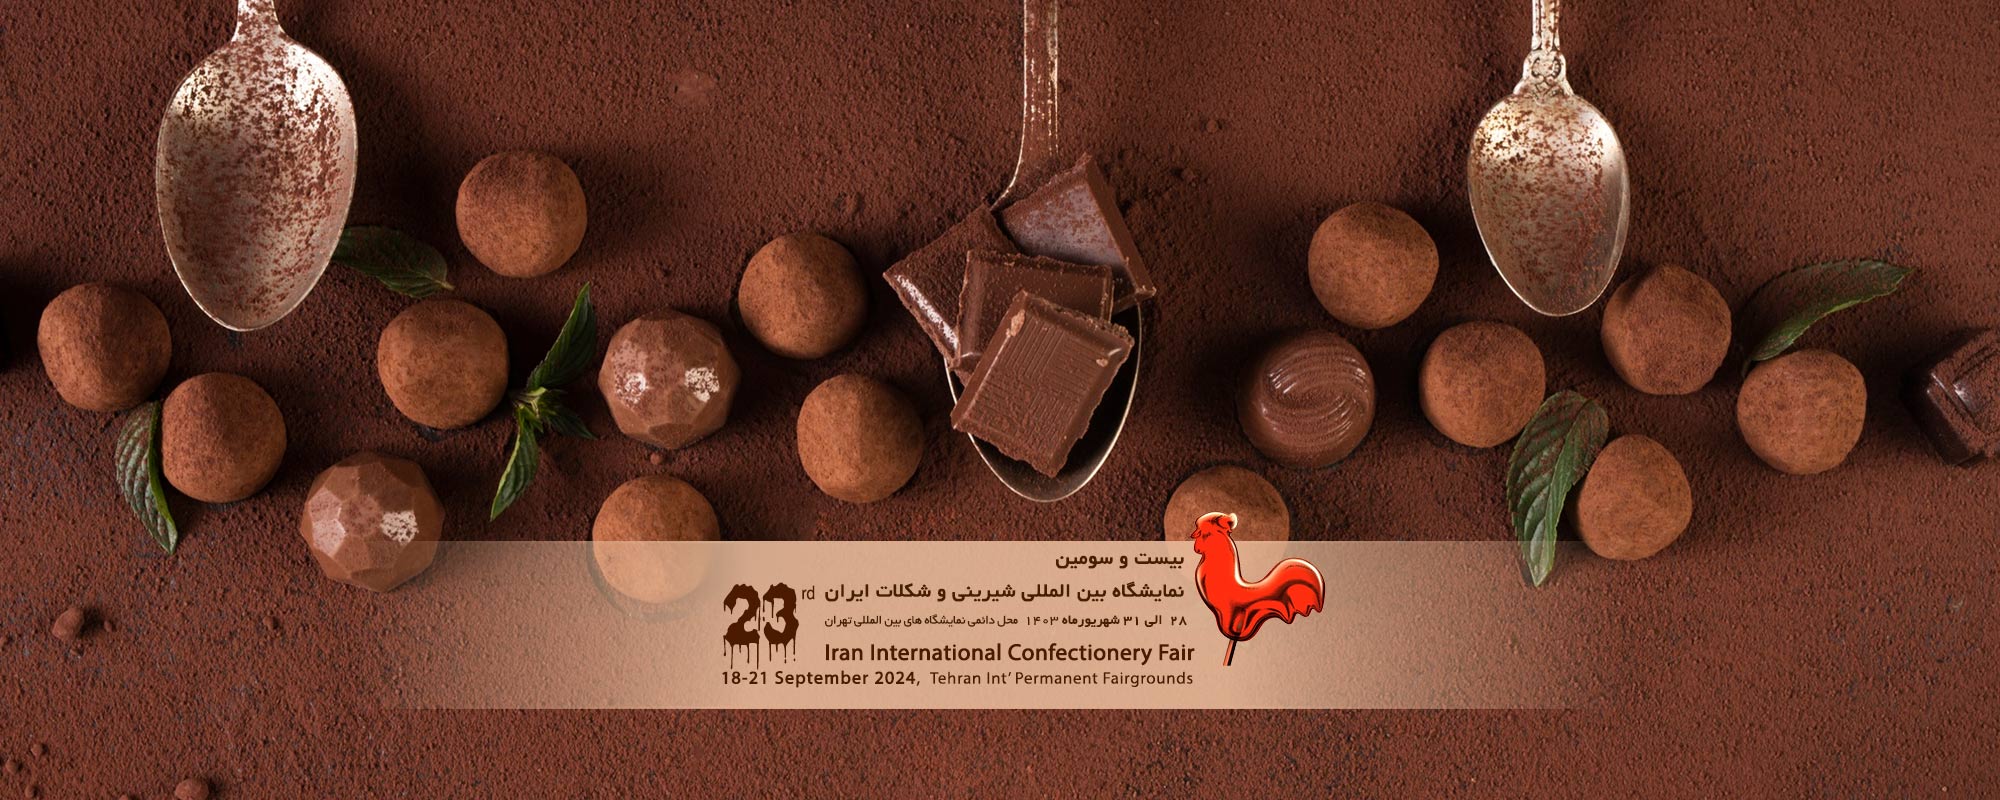 s2 - The 23rd Iran International Confectionery Fair 2024